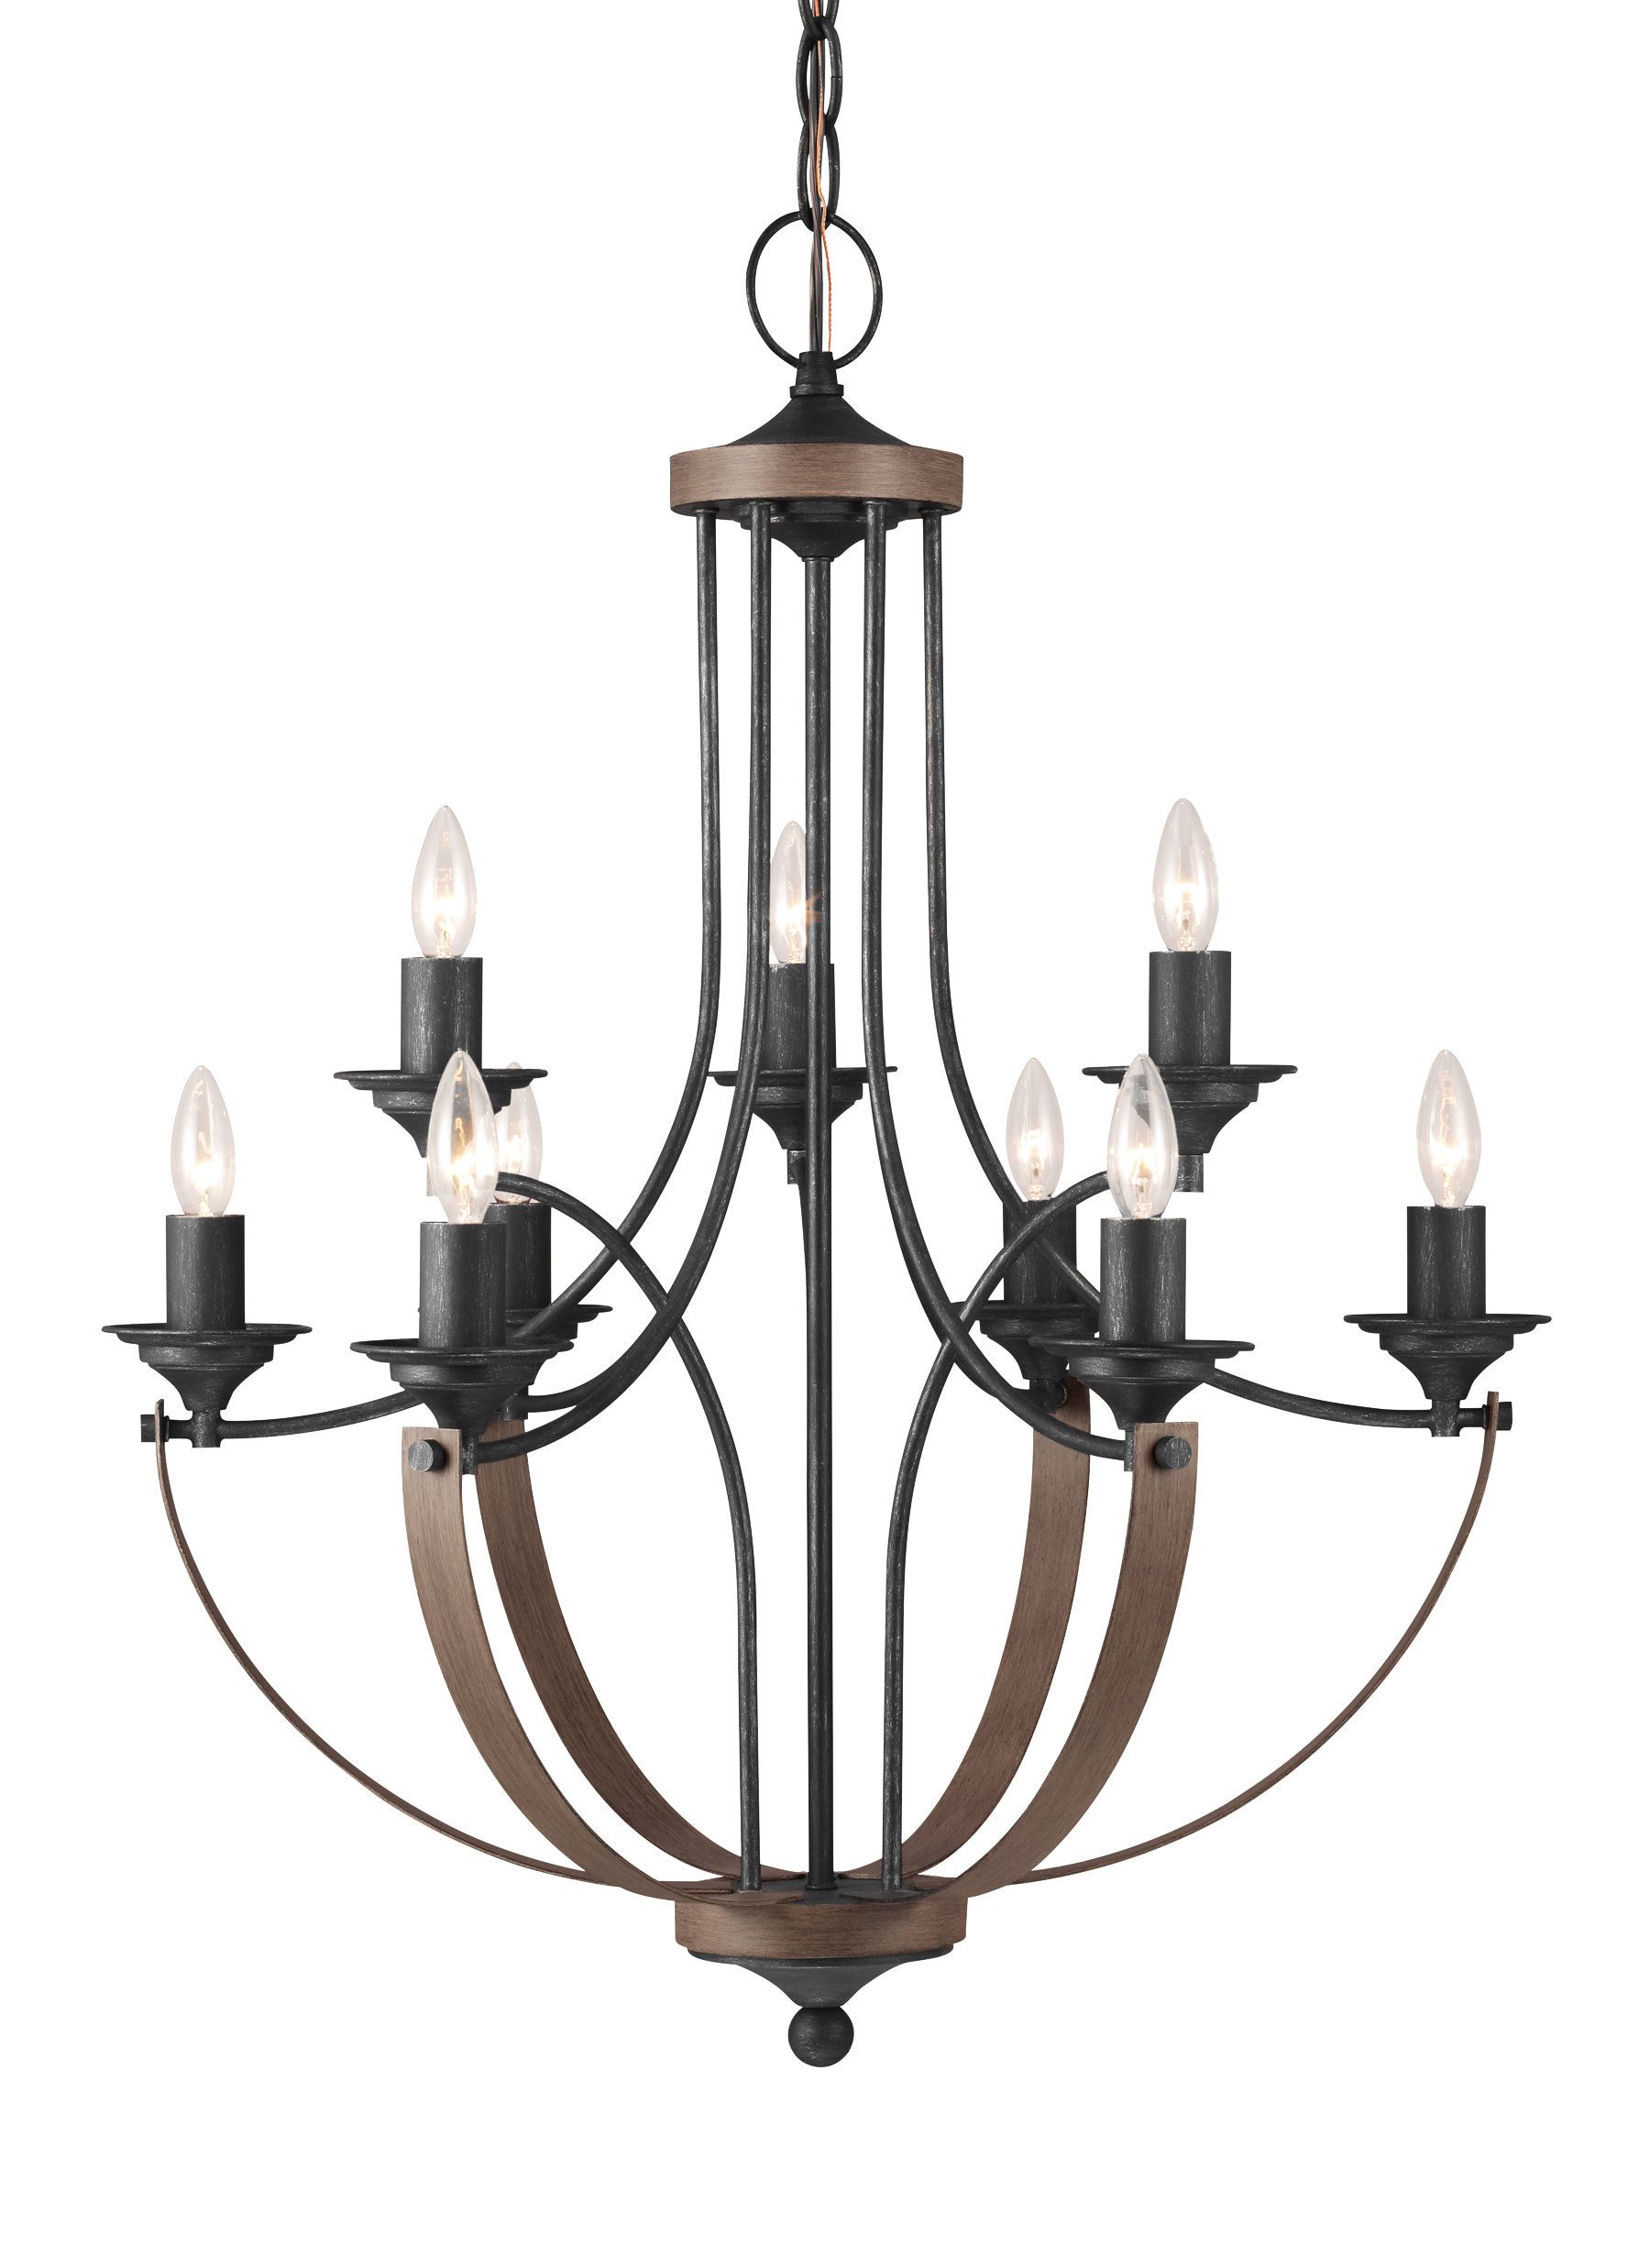 Camilla 9 Light Candle Style Chandeliers Pertaining To Most Up To Date Camilla 9 Light Candle Style Chandelier (View 1 of 20)